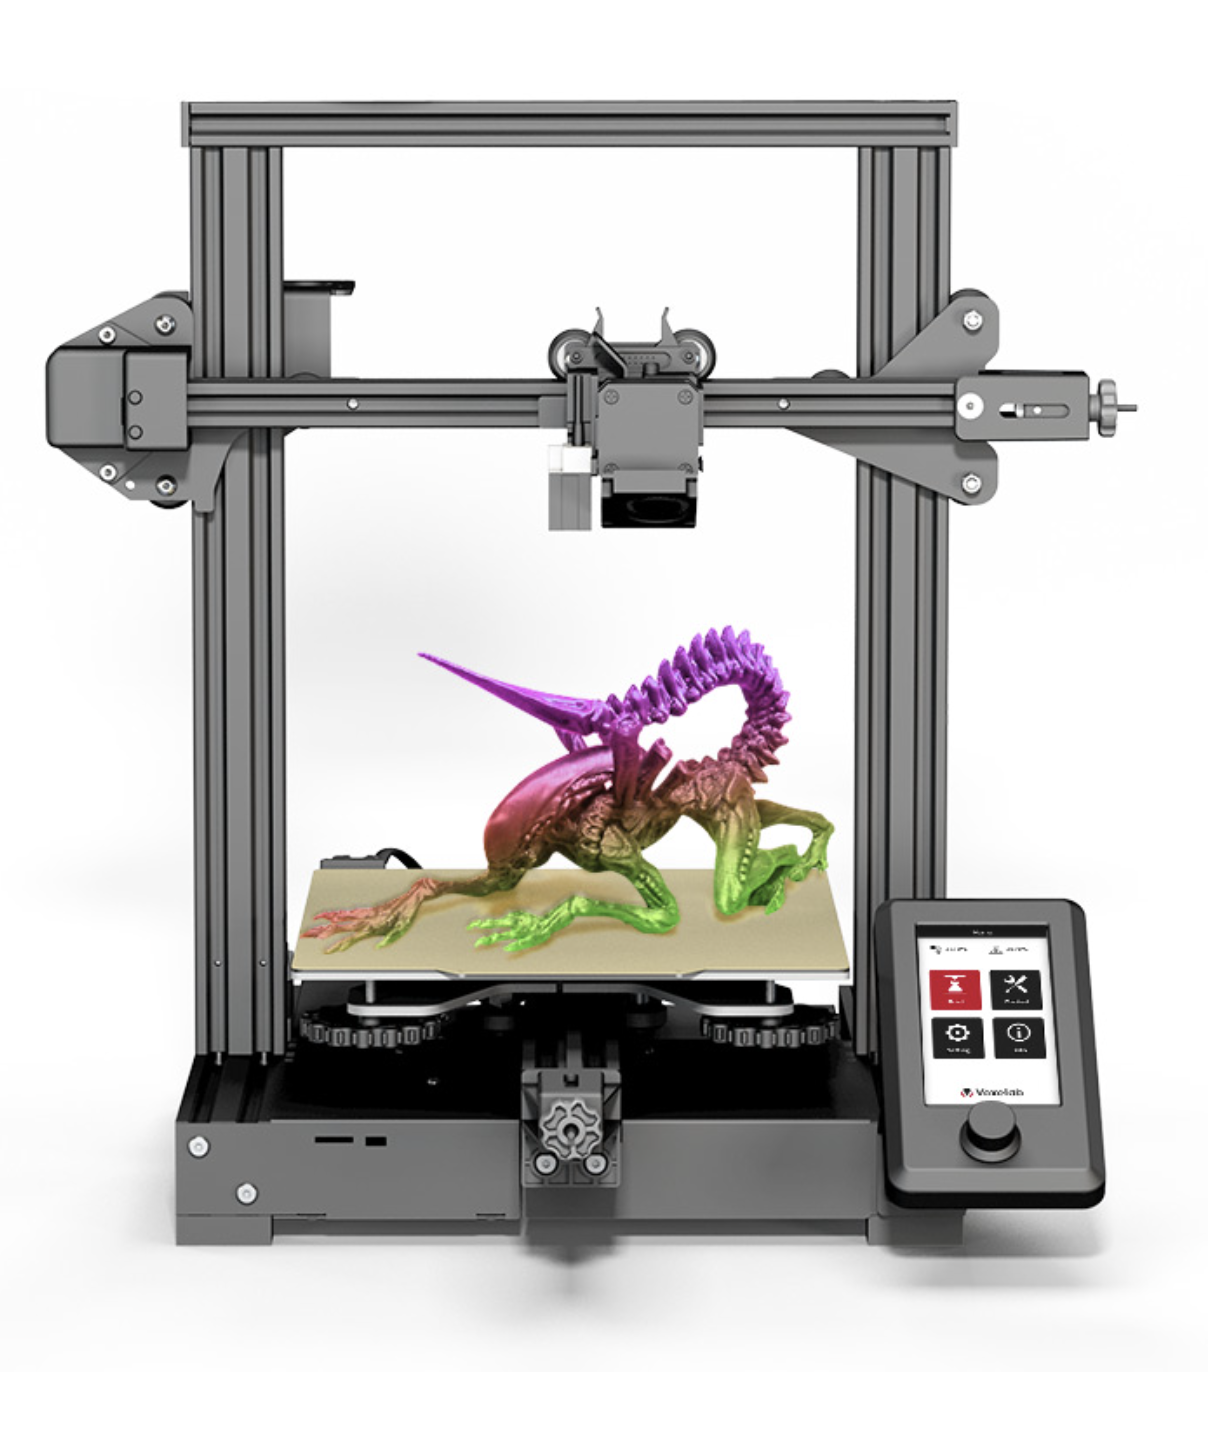 From Vision To New Fabrication 3D Printing!